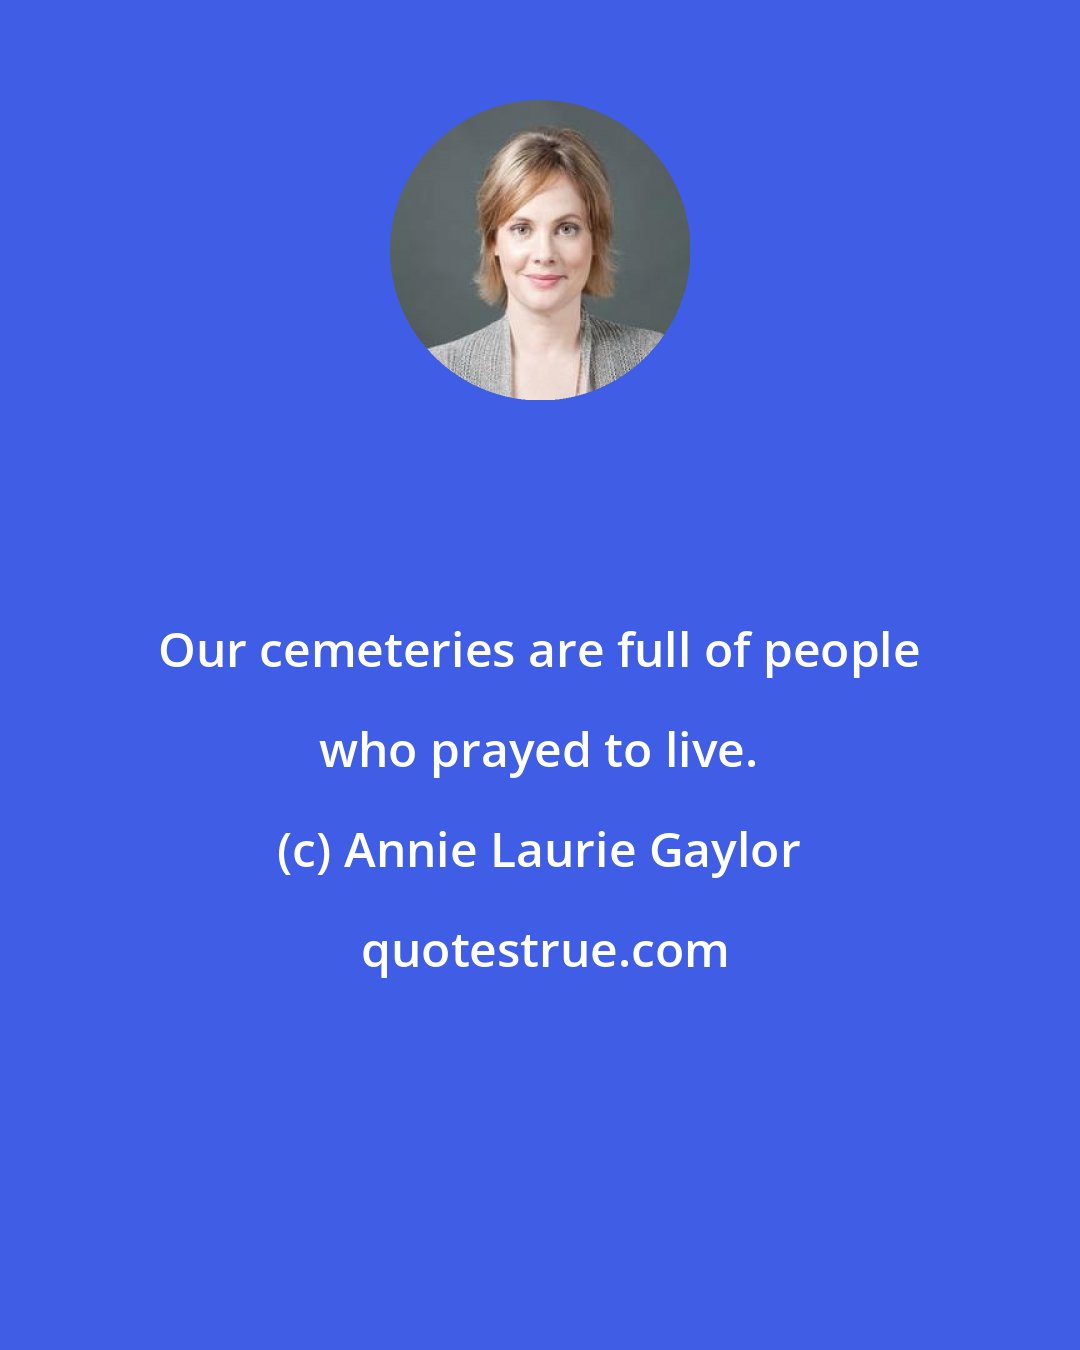 Annie Laurie Gaylor: Our cemeteries are full of people who prayed to live.